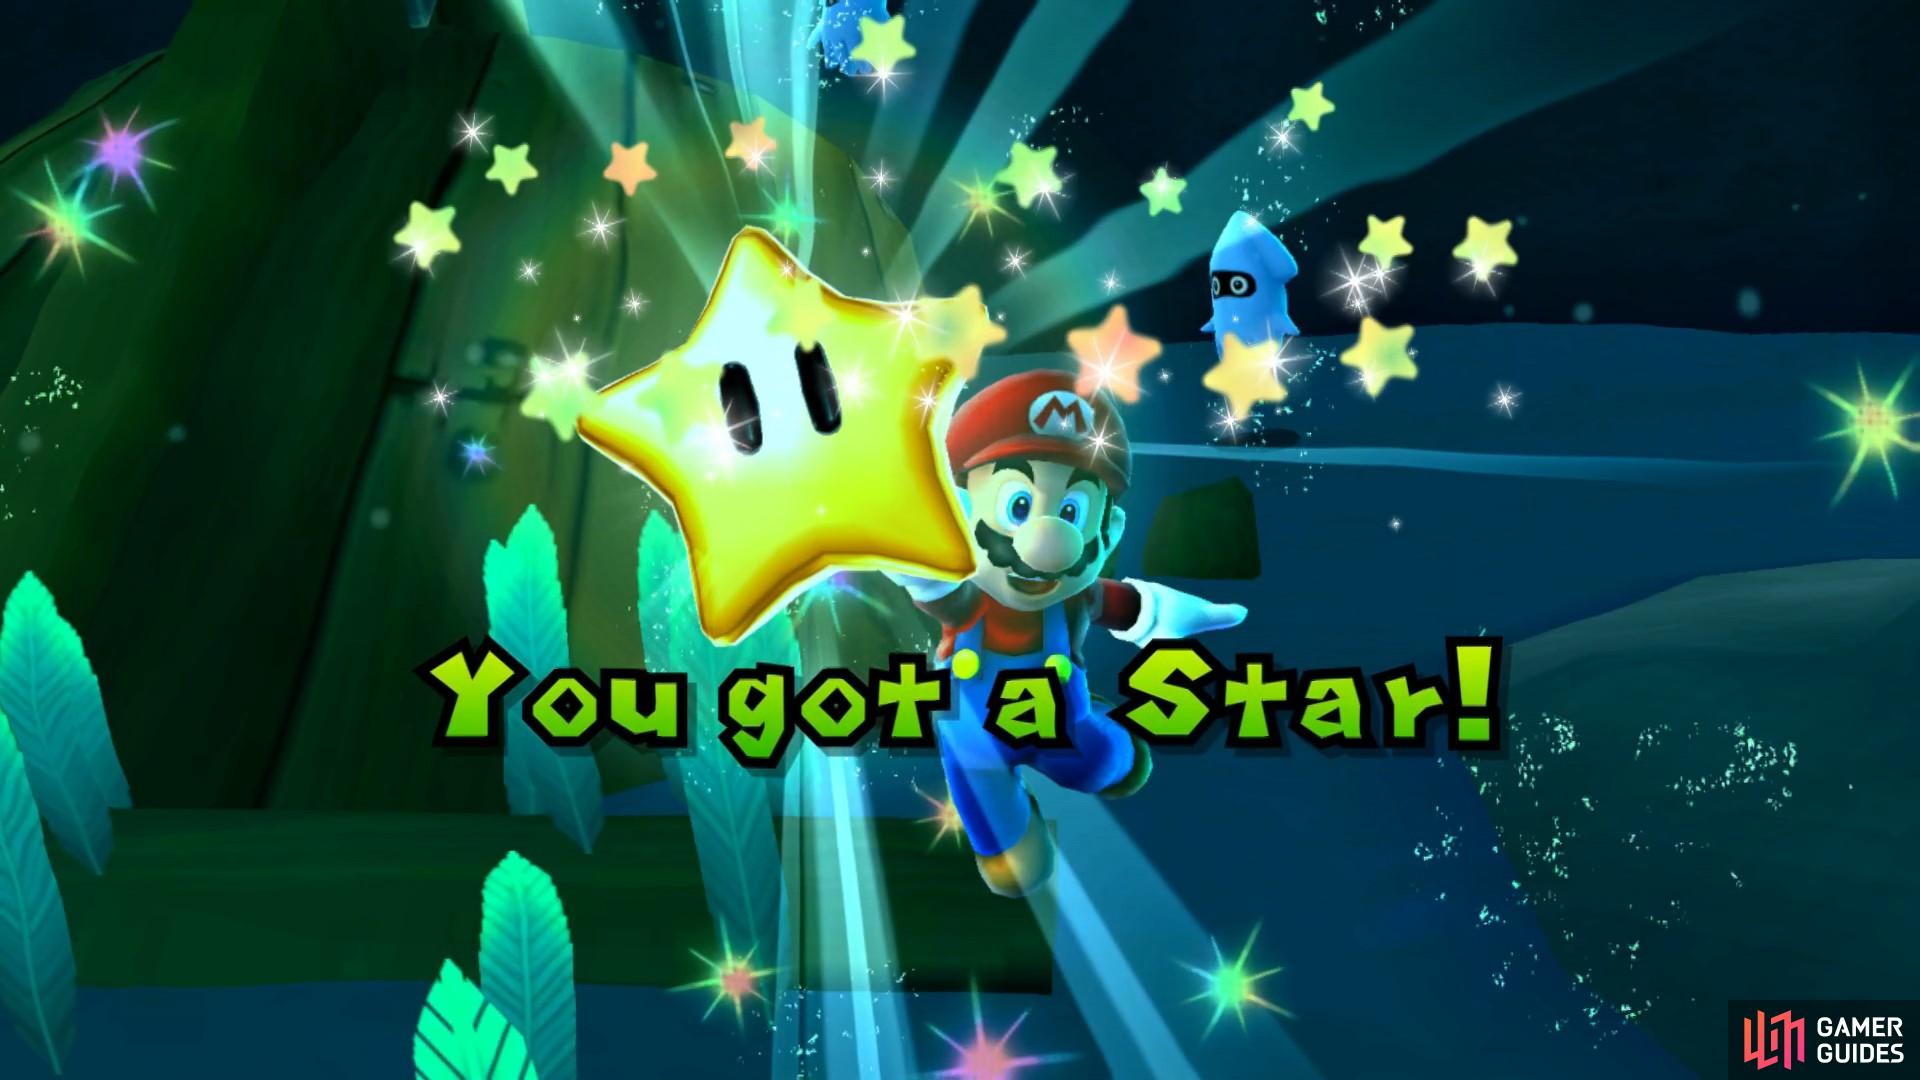 Grab the Star once you’ve completed Guppy’s challenge to finish the level.